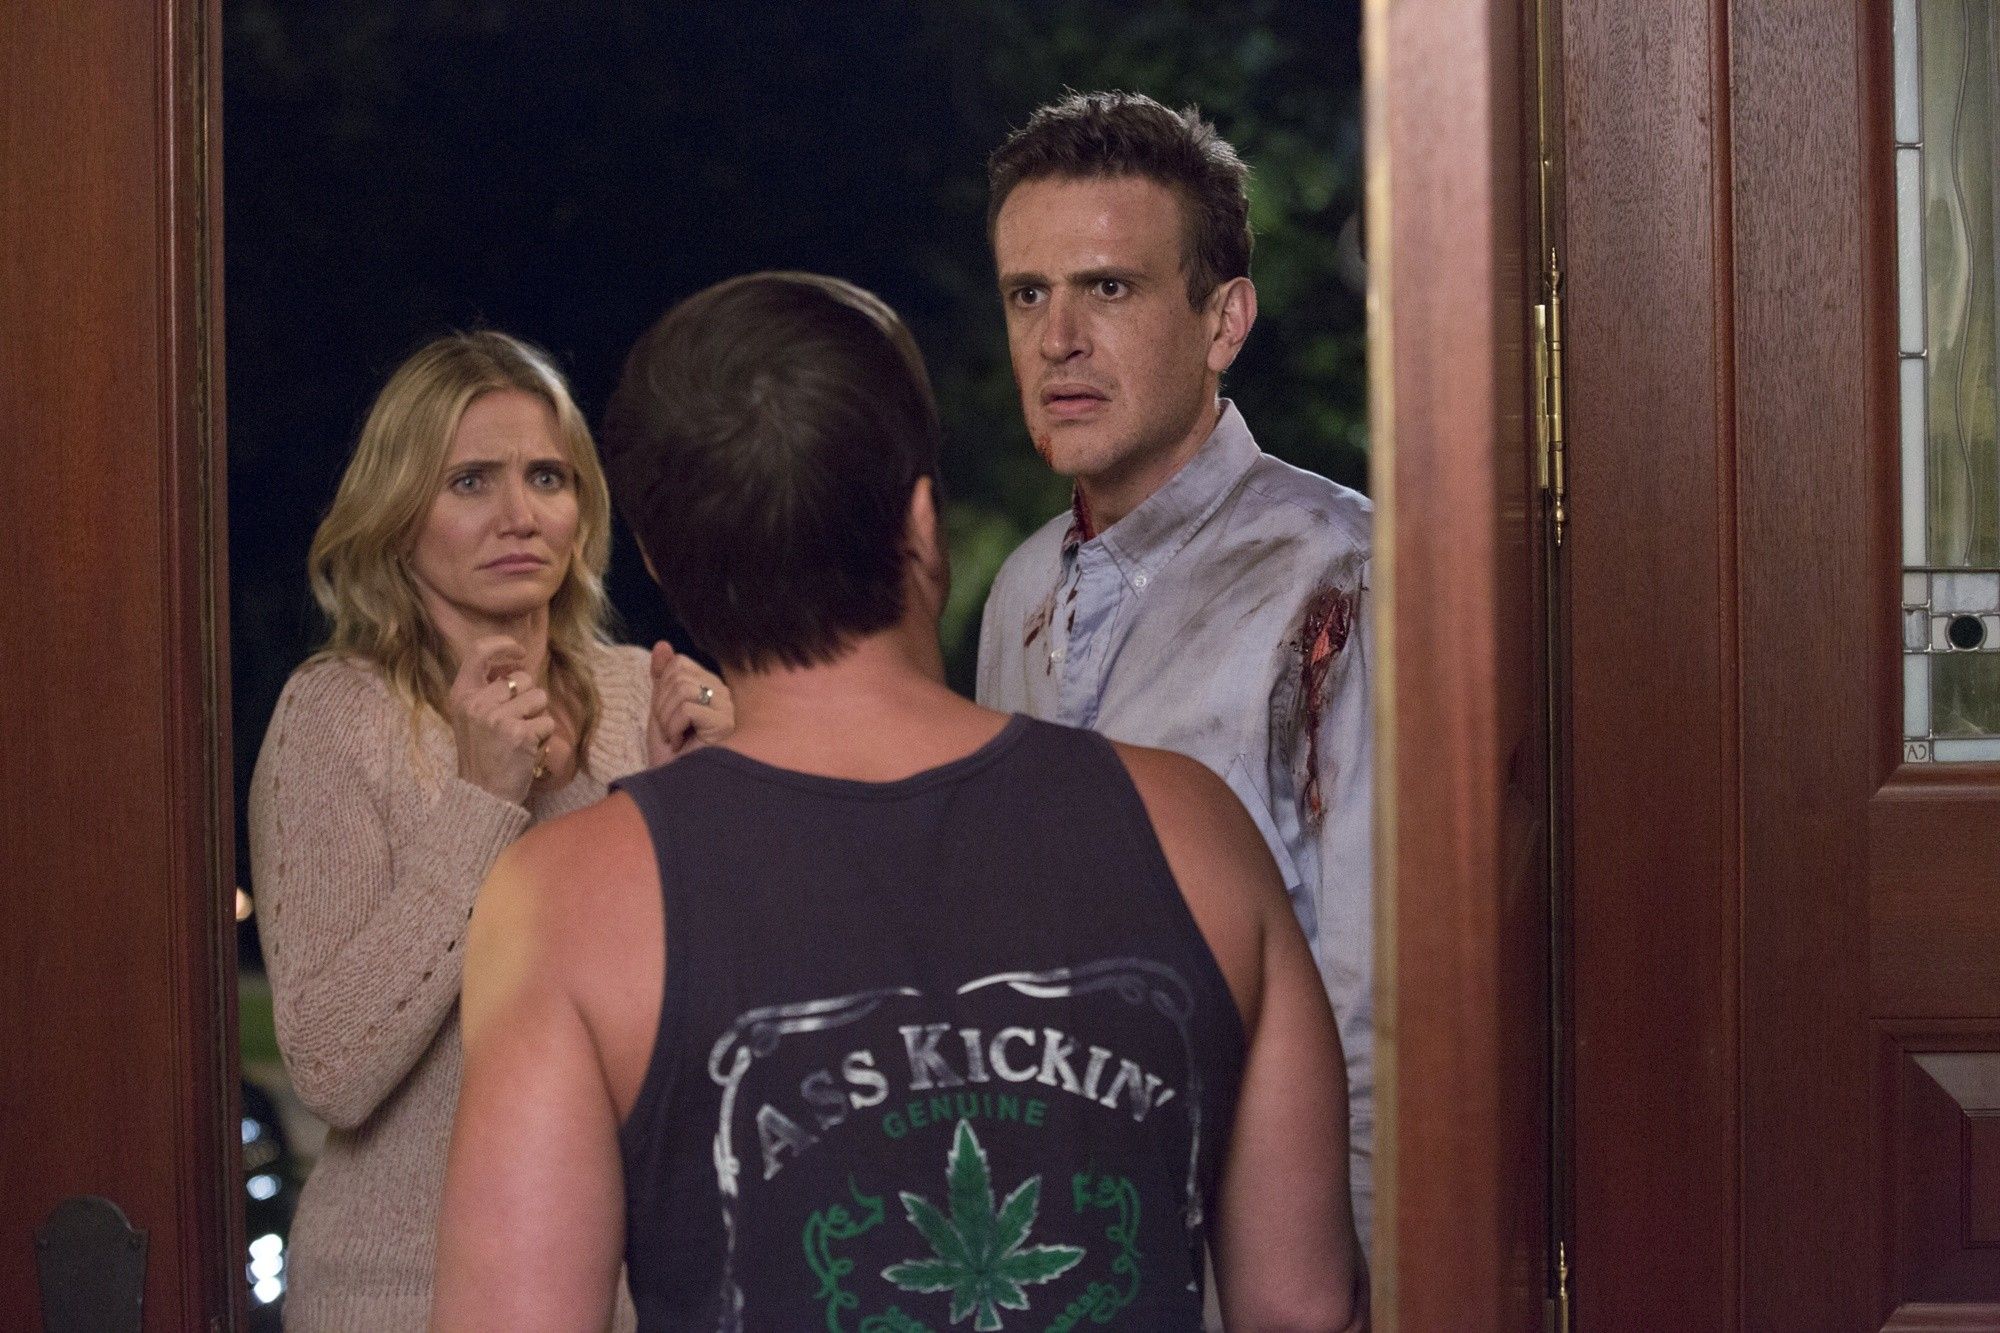 Cameron Diaz stars as Annie and Jason Segel stars as Jay in Columbia Pictures' Sex Tape (2014)